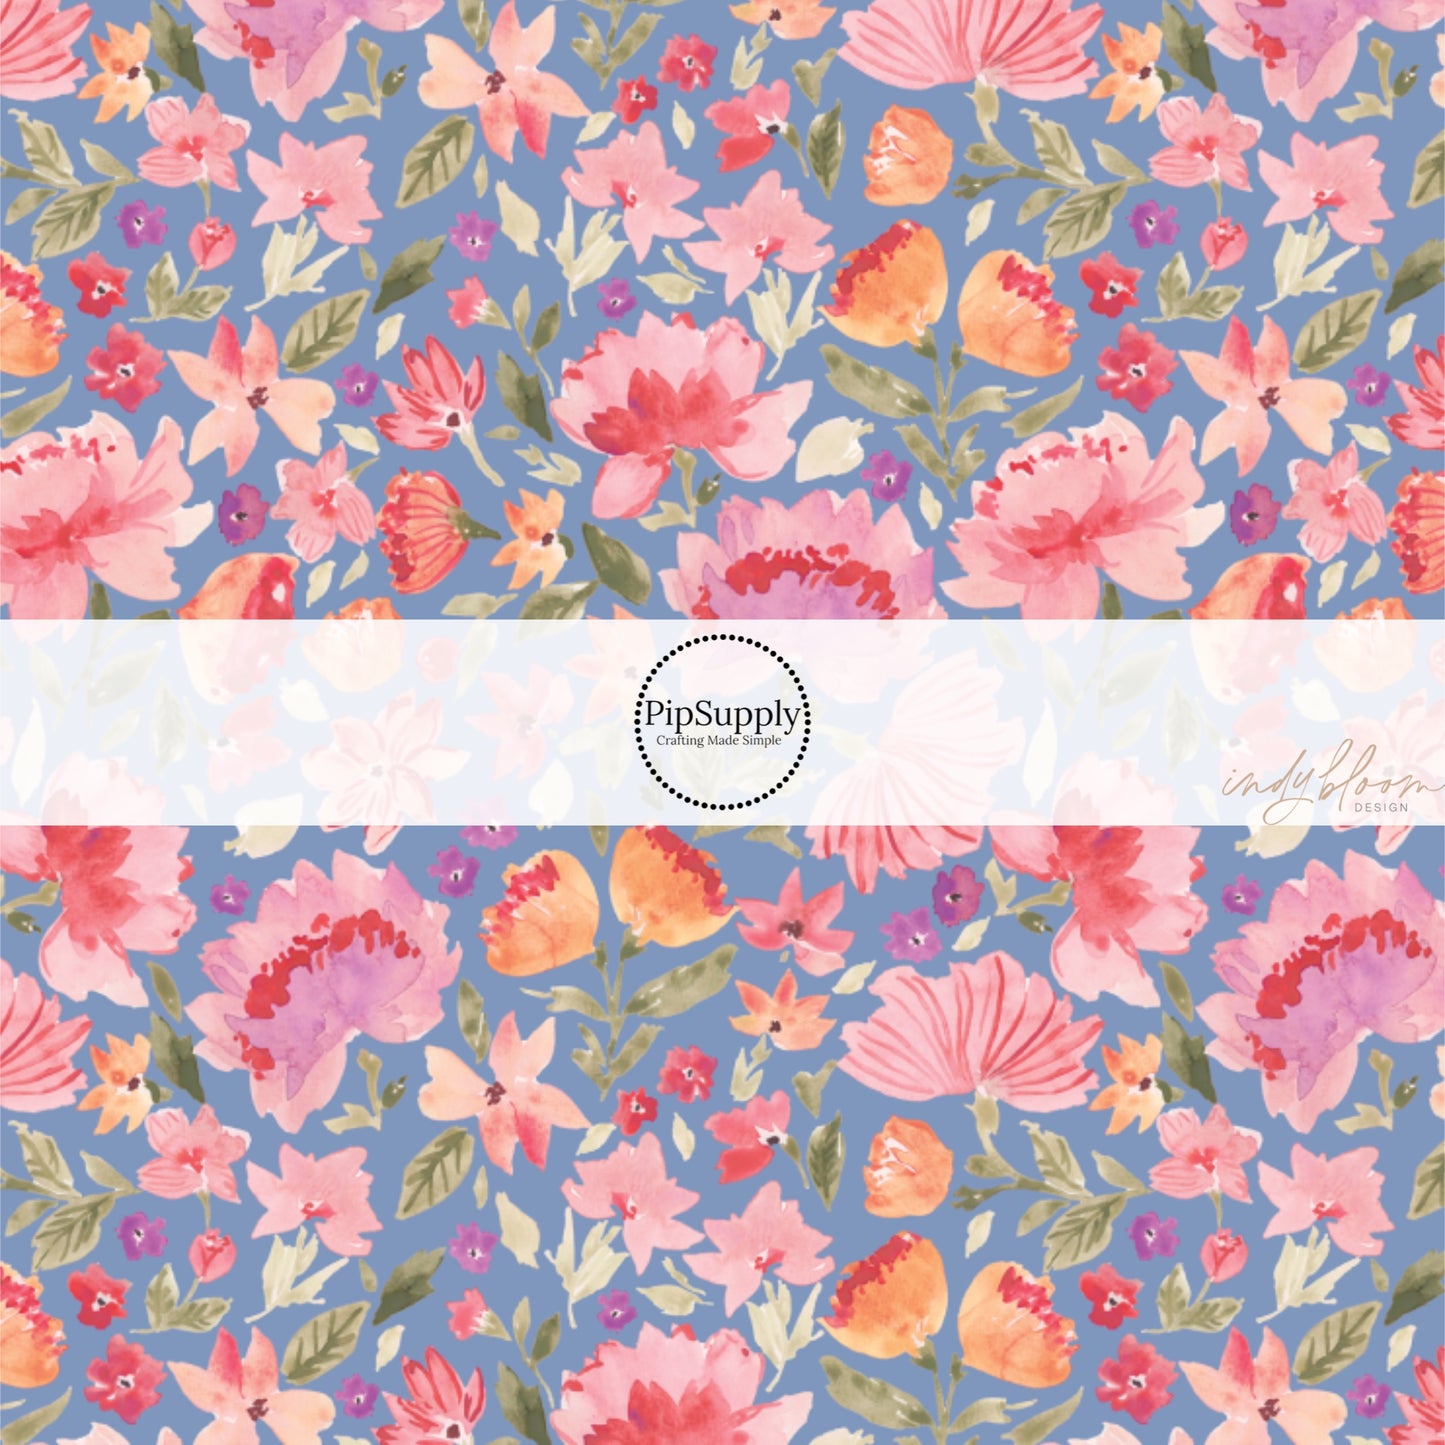 This summer fabric by the yard features multi colored flowers on blue. This fun summer themed fabric can be used for all your sewing and crafting needs!